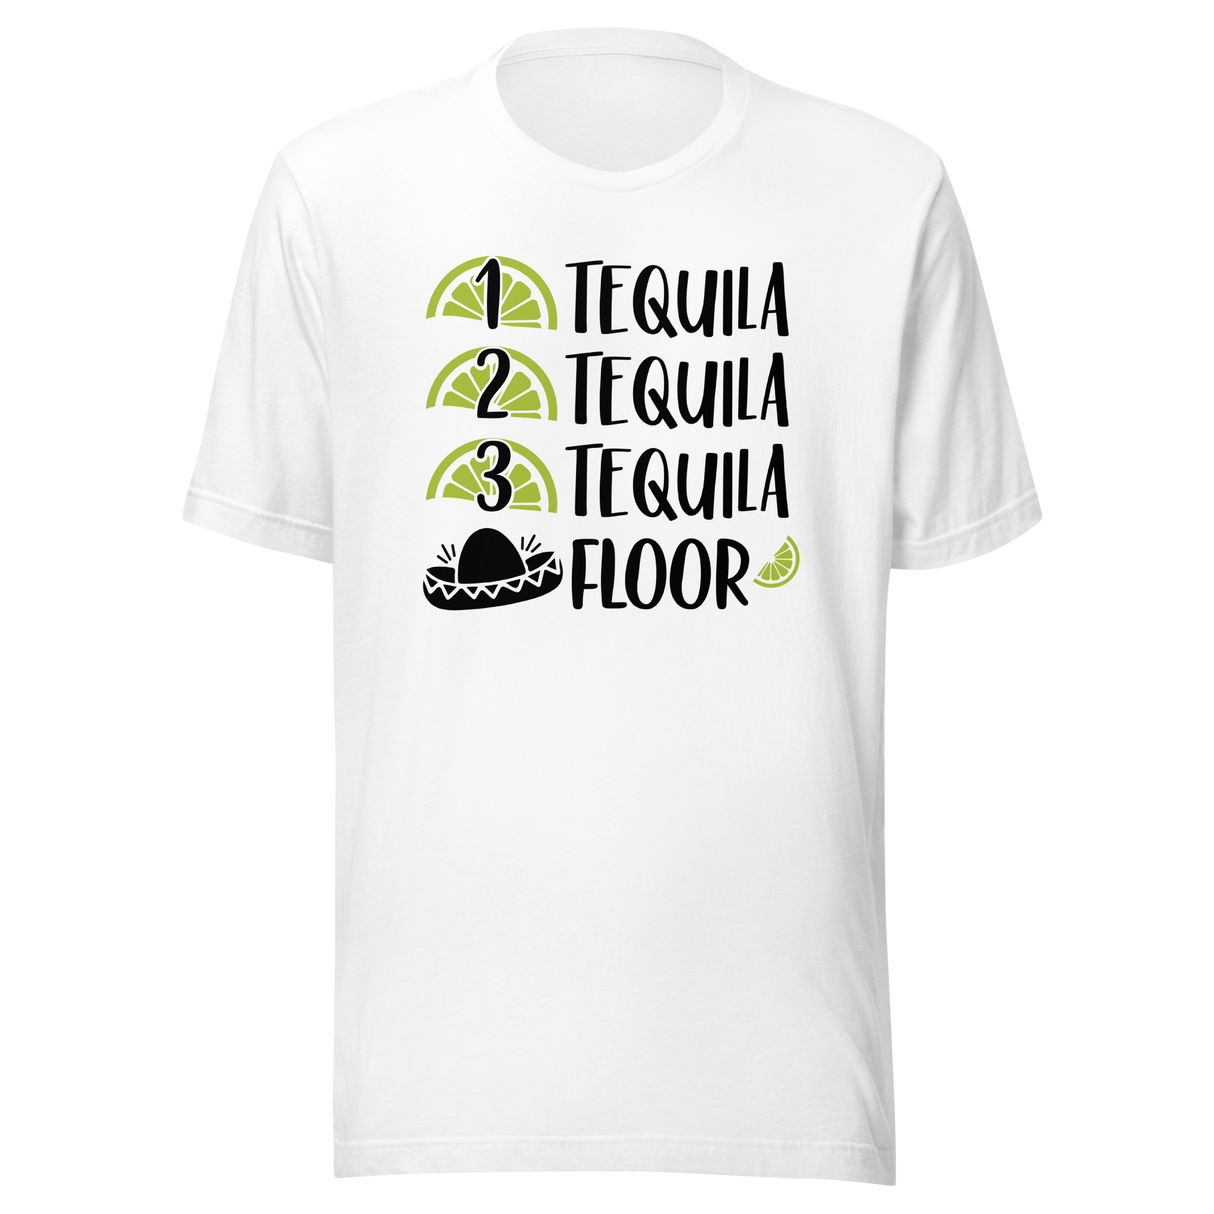 one-tequila-two-tequila-three-tequila-floor-food-tee-funny-t-shirt-tequila-tee-humor-t-shirt-quirky-tee#color_white